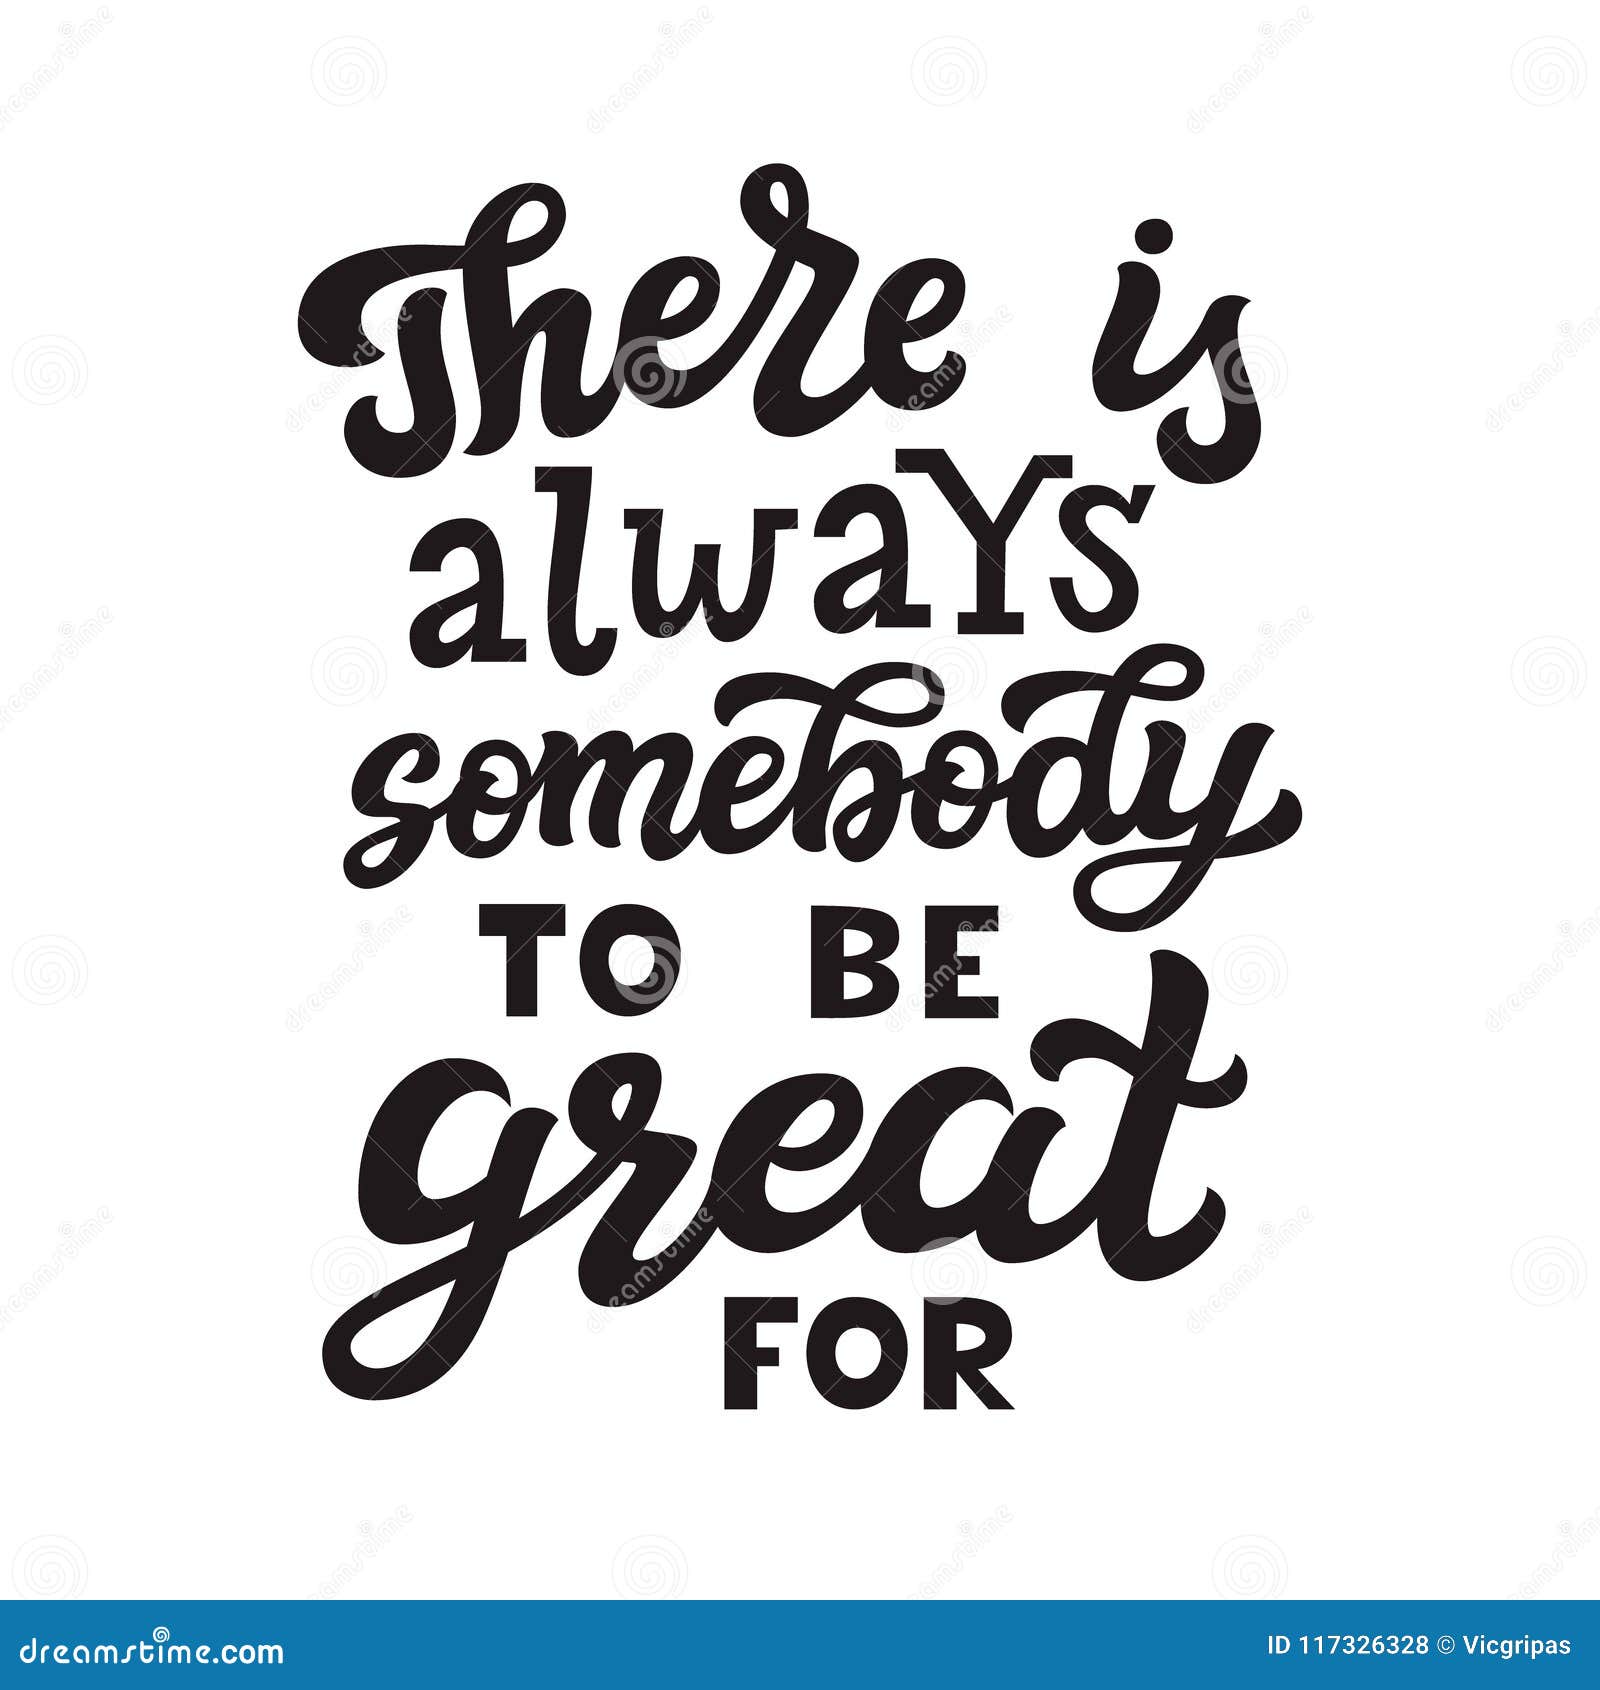 There is always somebody to be great for. Original hand drawn quote. Vector calligraphy for posters, t shirts, home decor